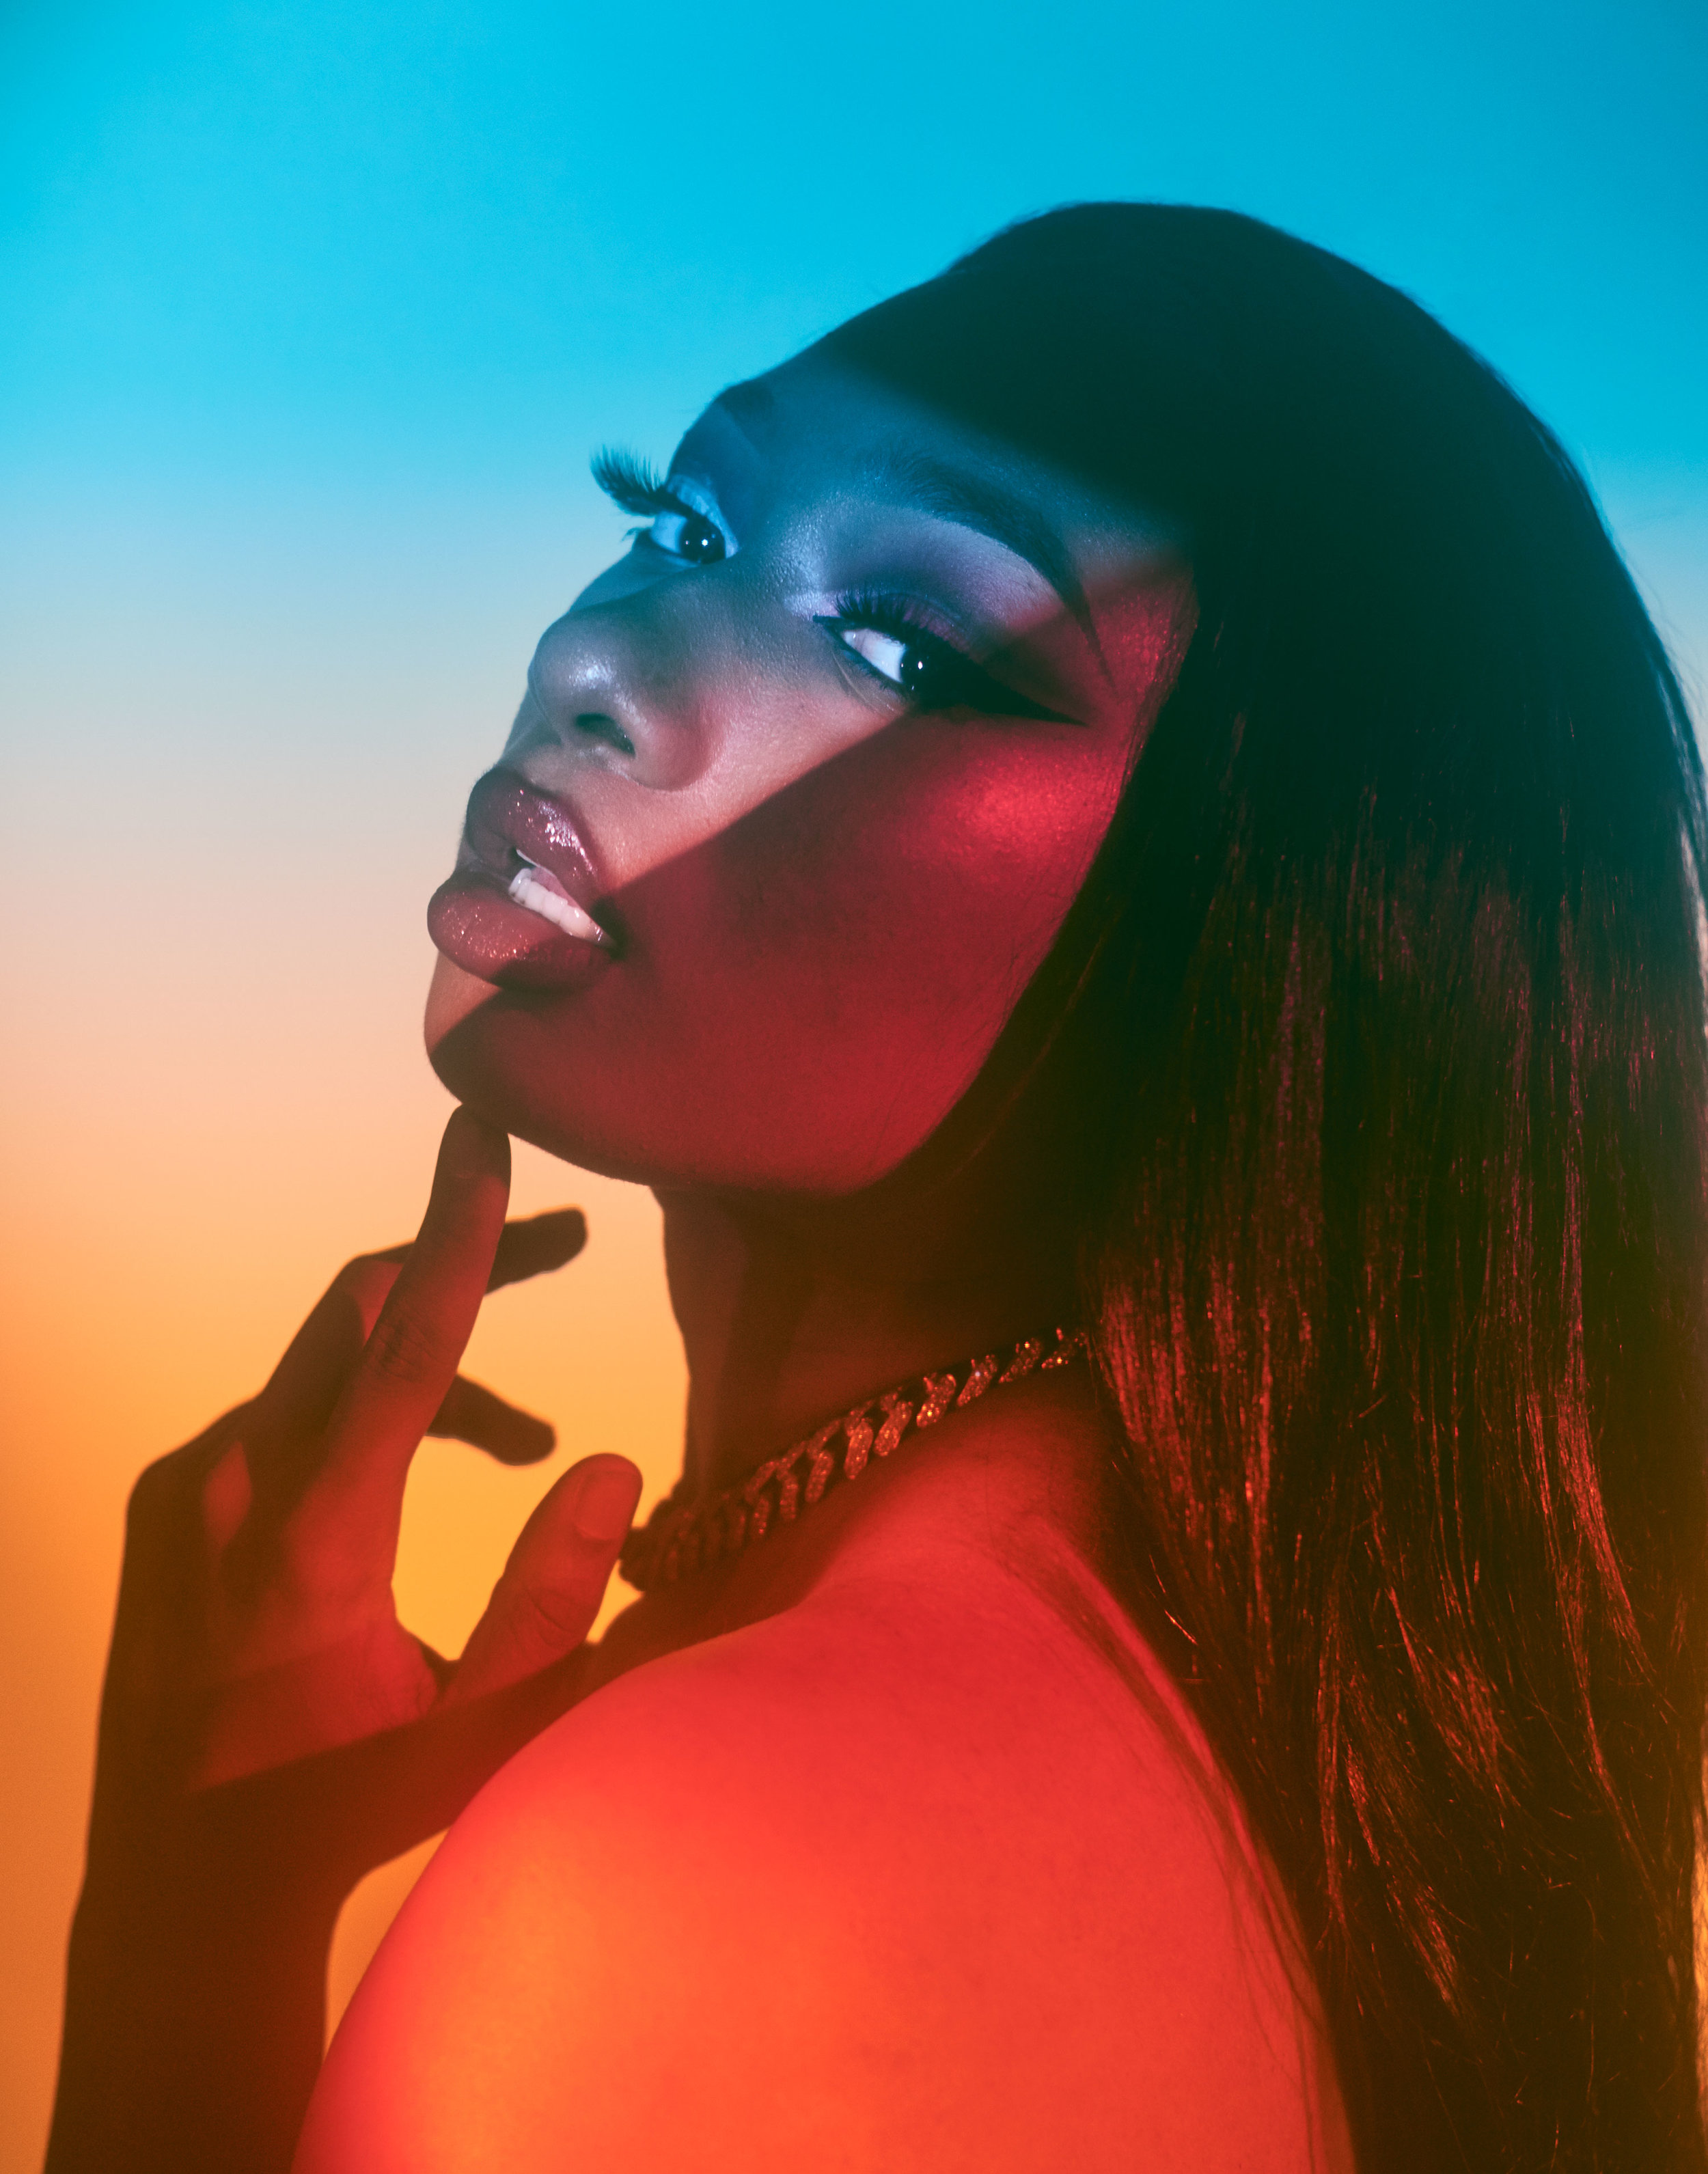   Maciek Jasik  photographed Megan Thee Stallion for Vulture and New York Magazine in April 2019.  